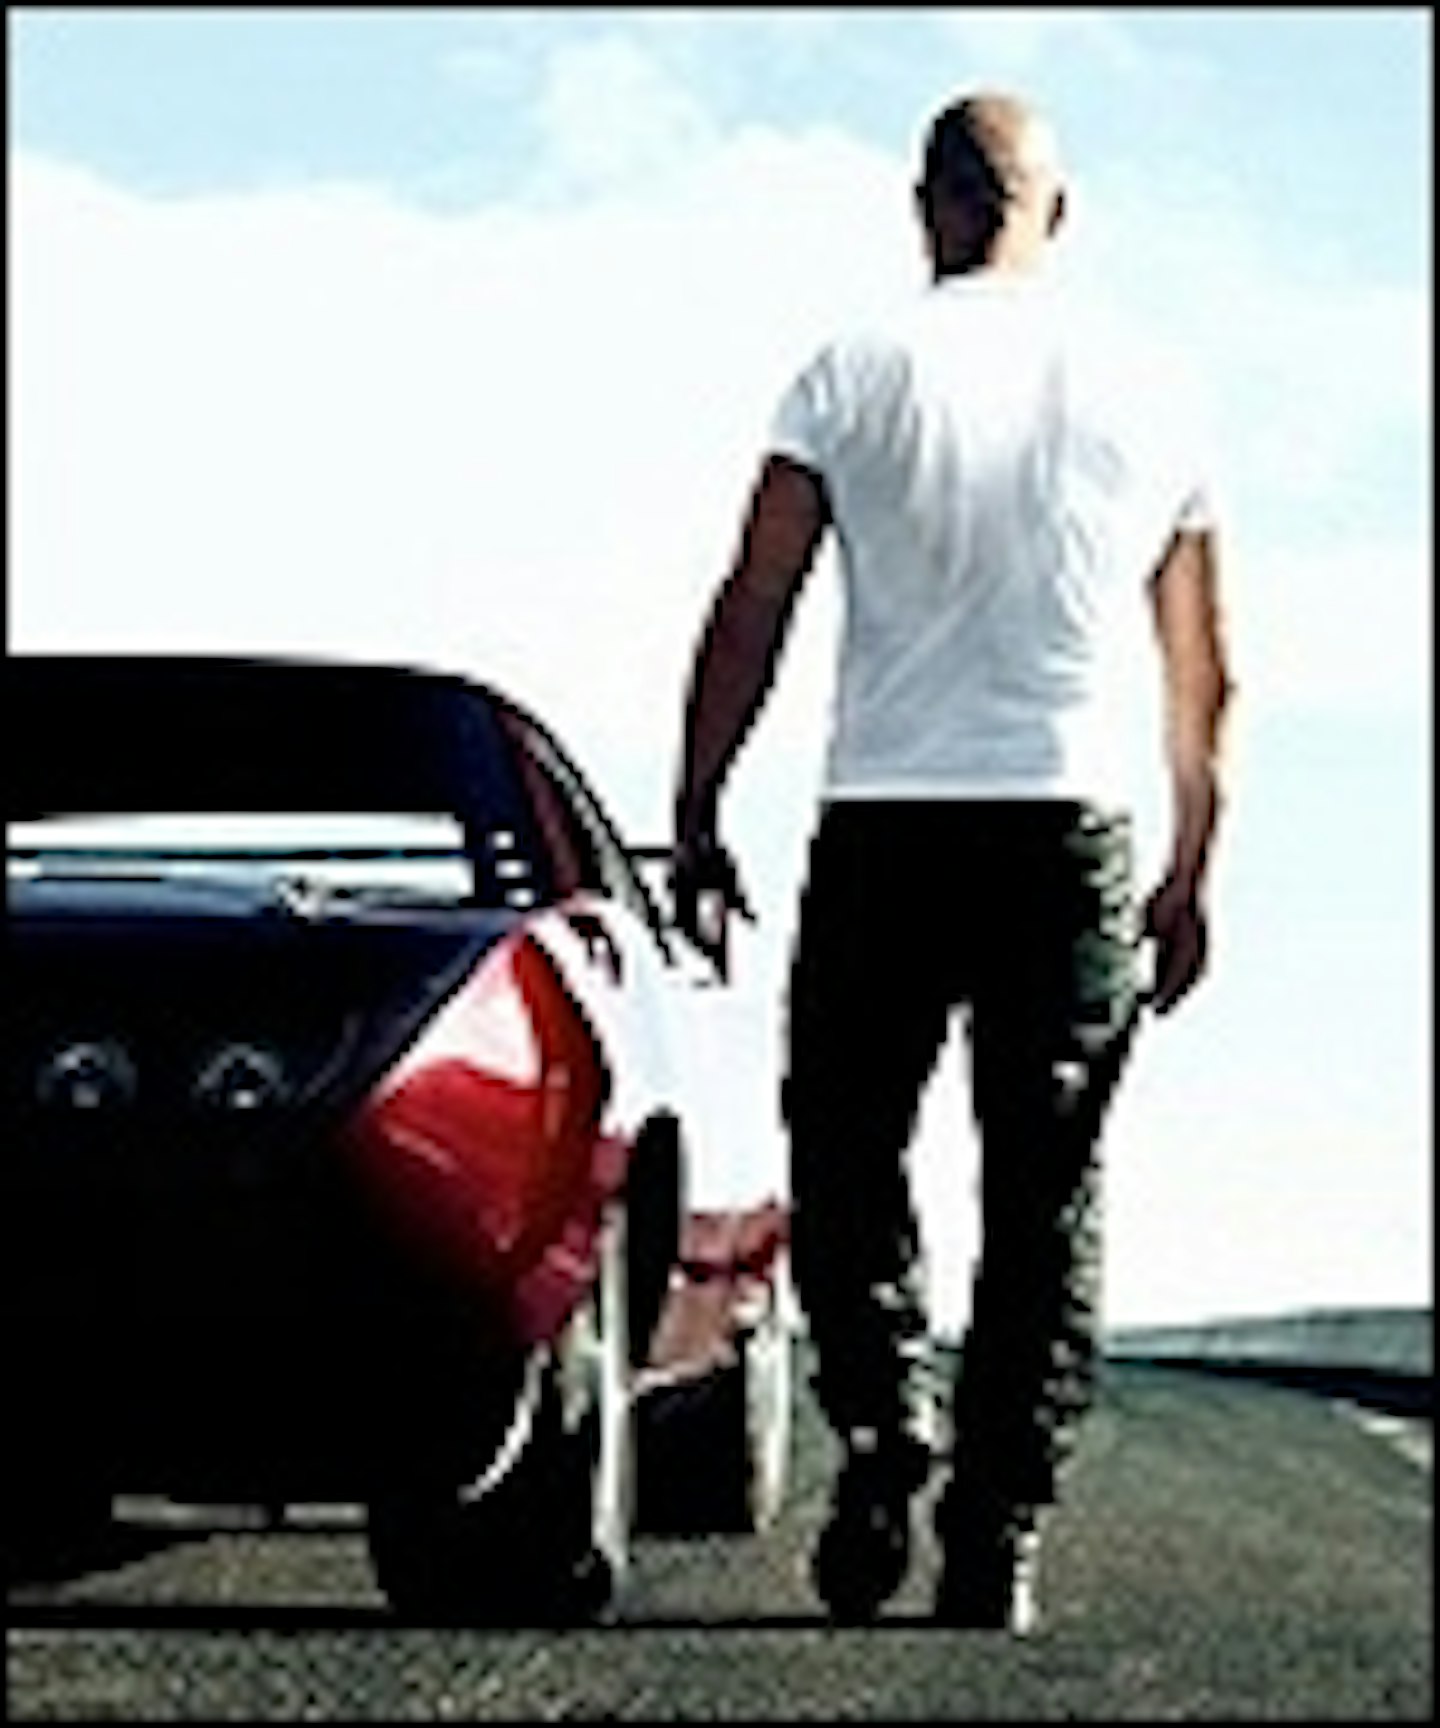 Fast & Furious 6 Trailer Hits